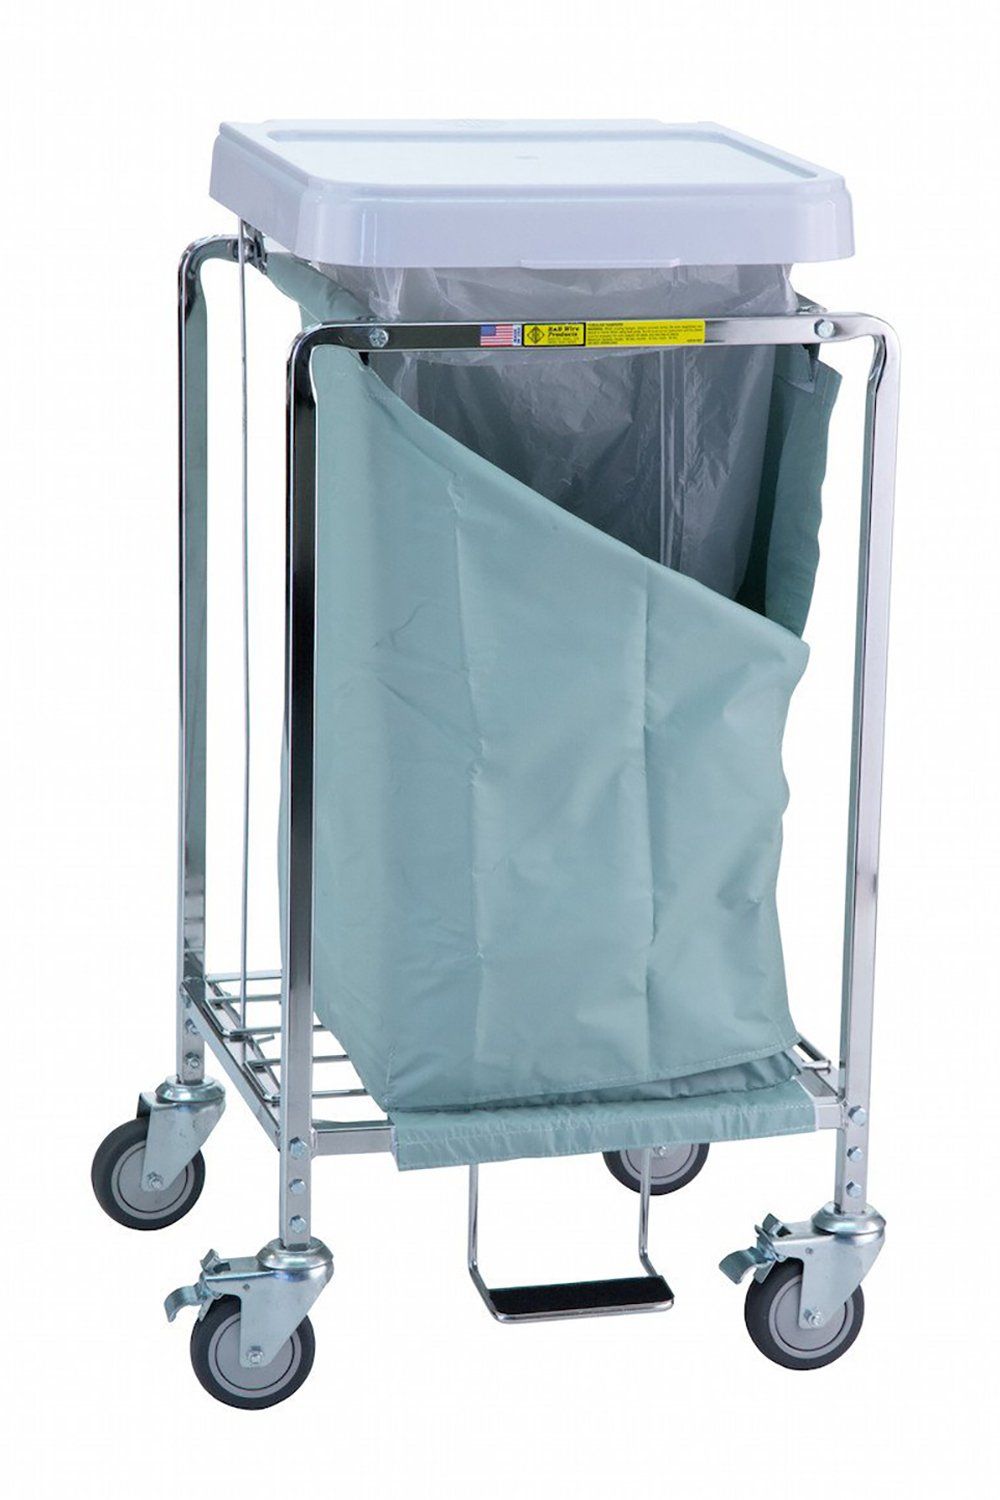 Replacement "Easy Access" Bag Infection Control & Housekeeping R&B 